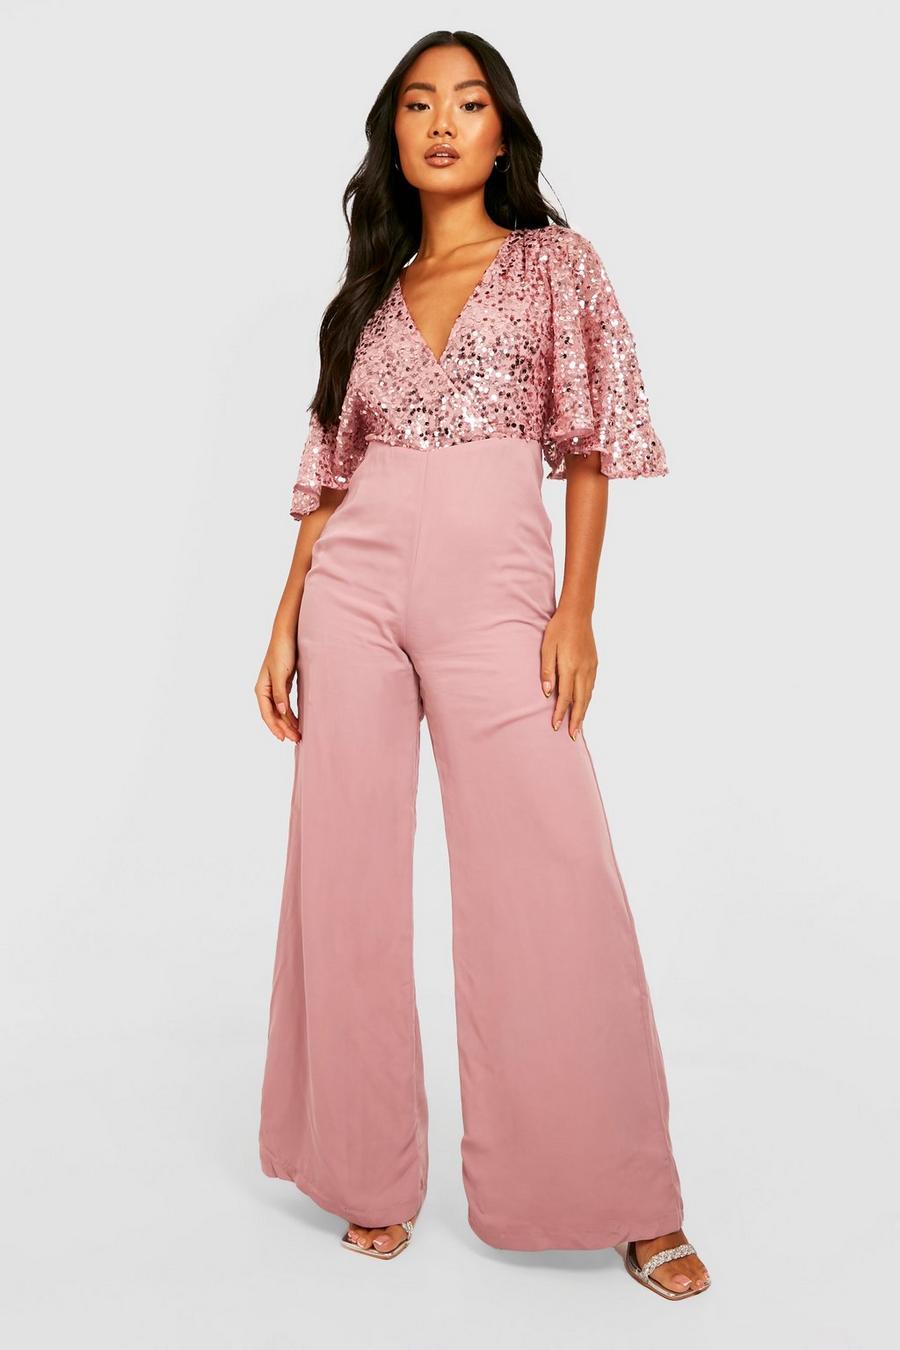 Dusty rose pink Petite Sequin Flared Sleeve Wide Leg Jumpsuit